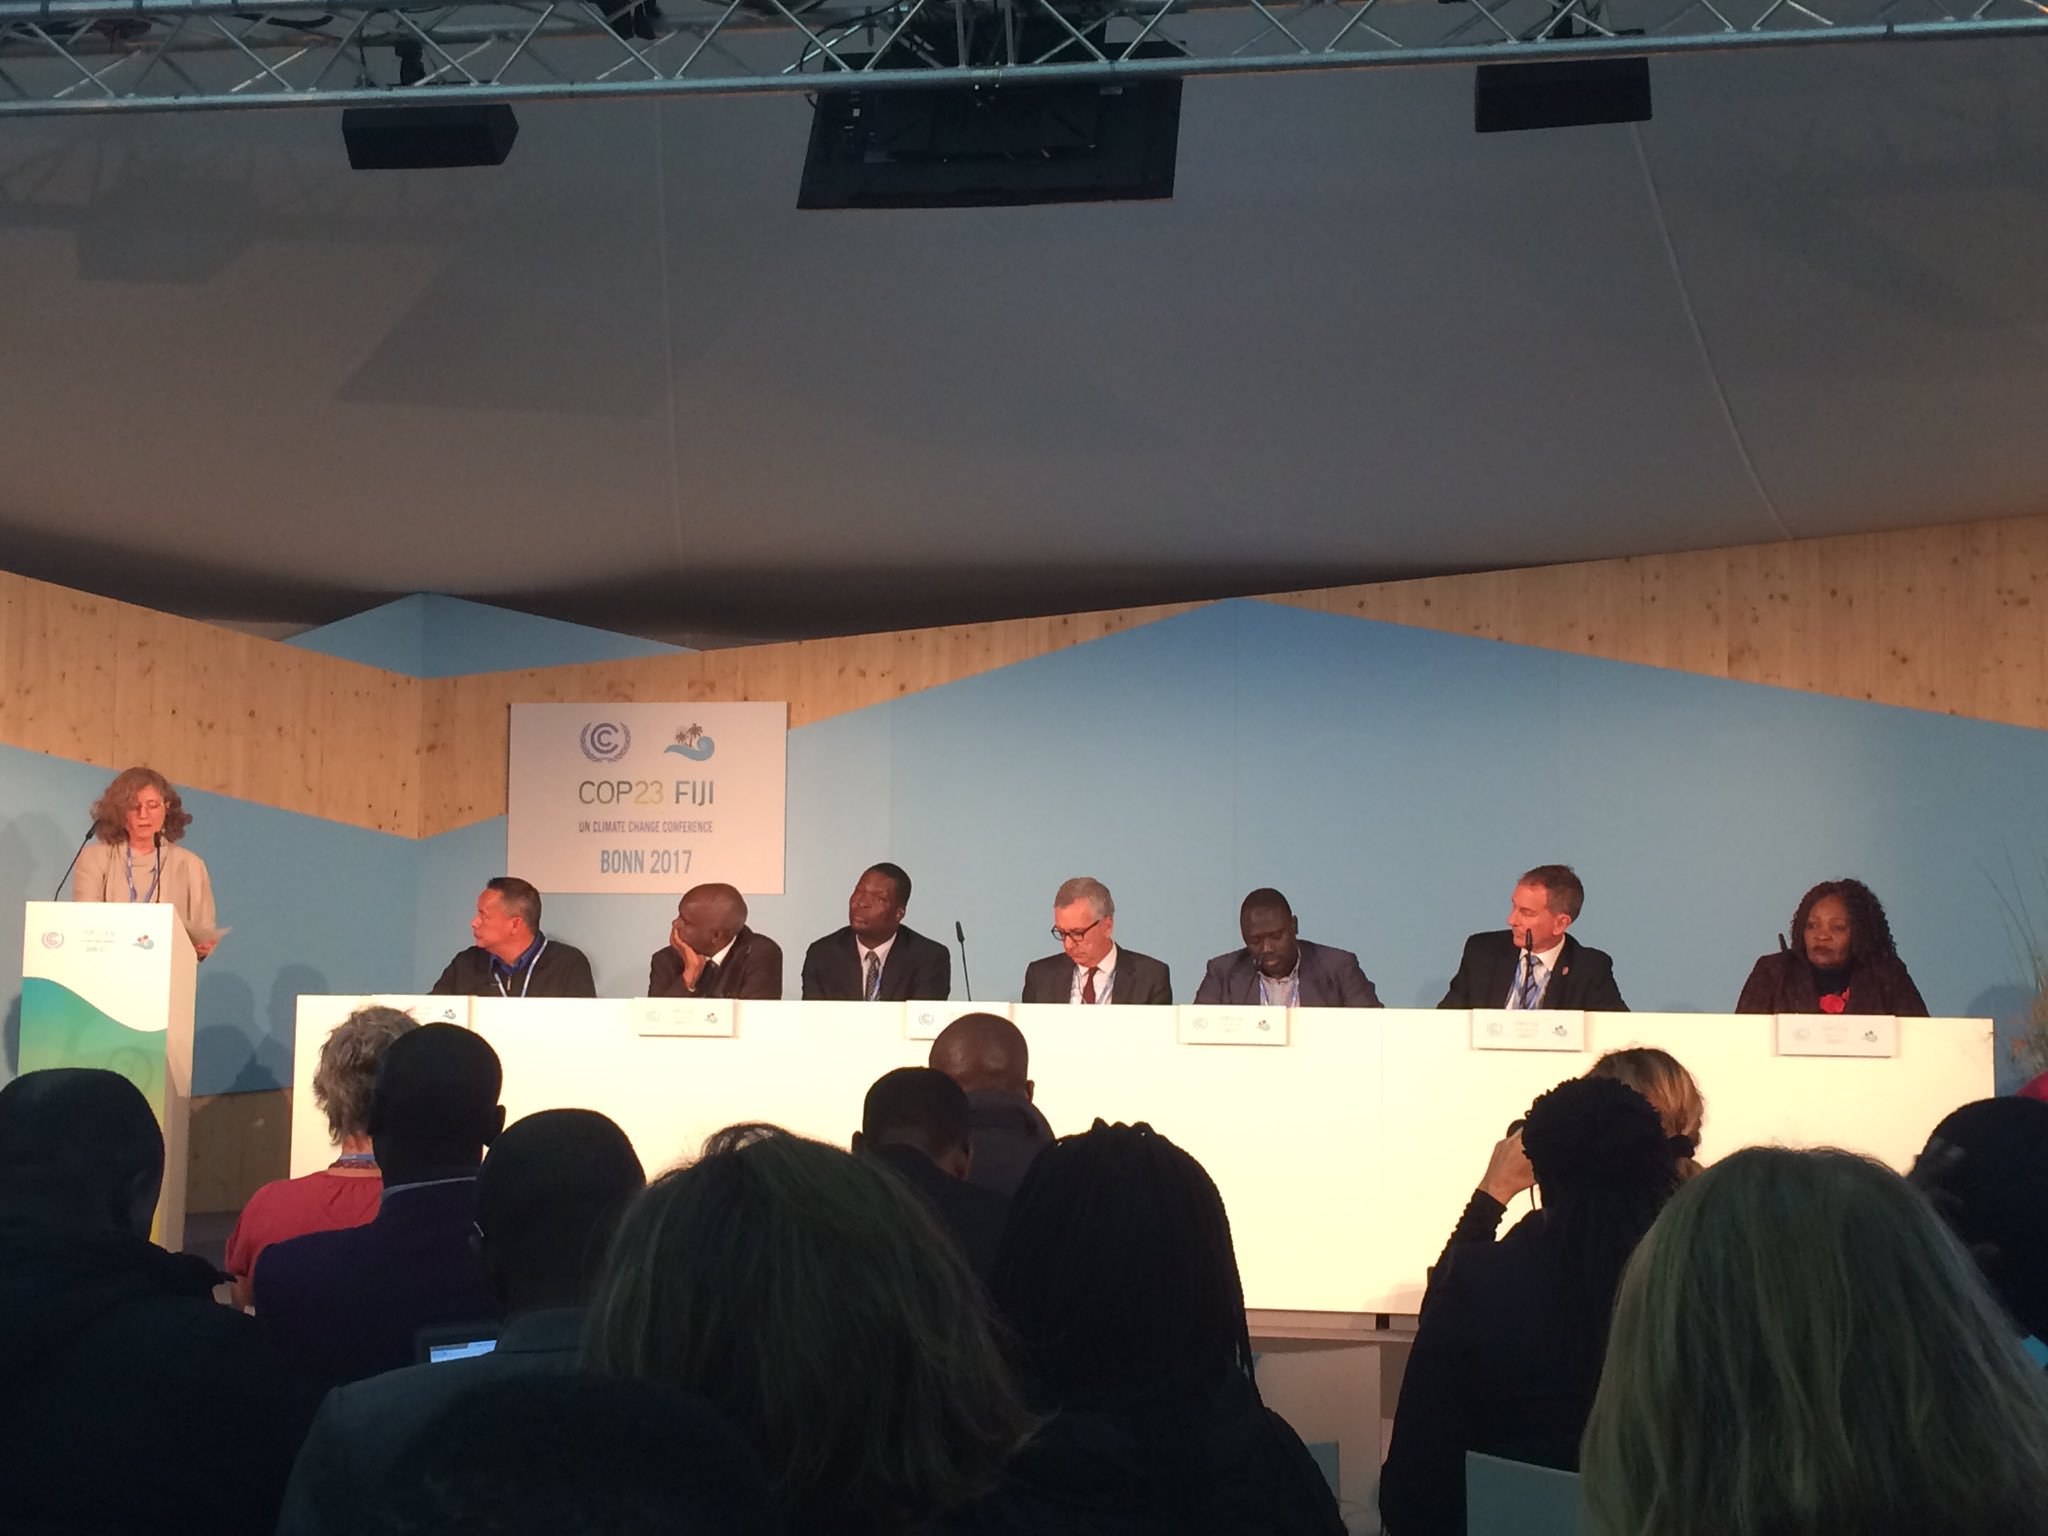 @adaconsortium @iied talking about decentralised climate finance @COP23 Kenya and Tanzania show the way https://t.co/39NKRSNjBf